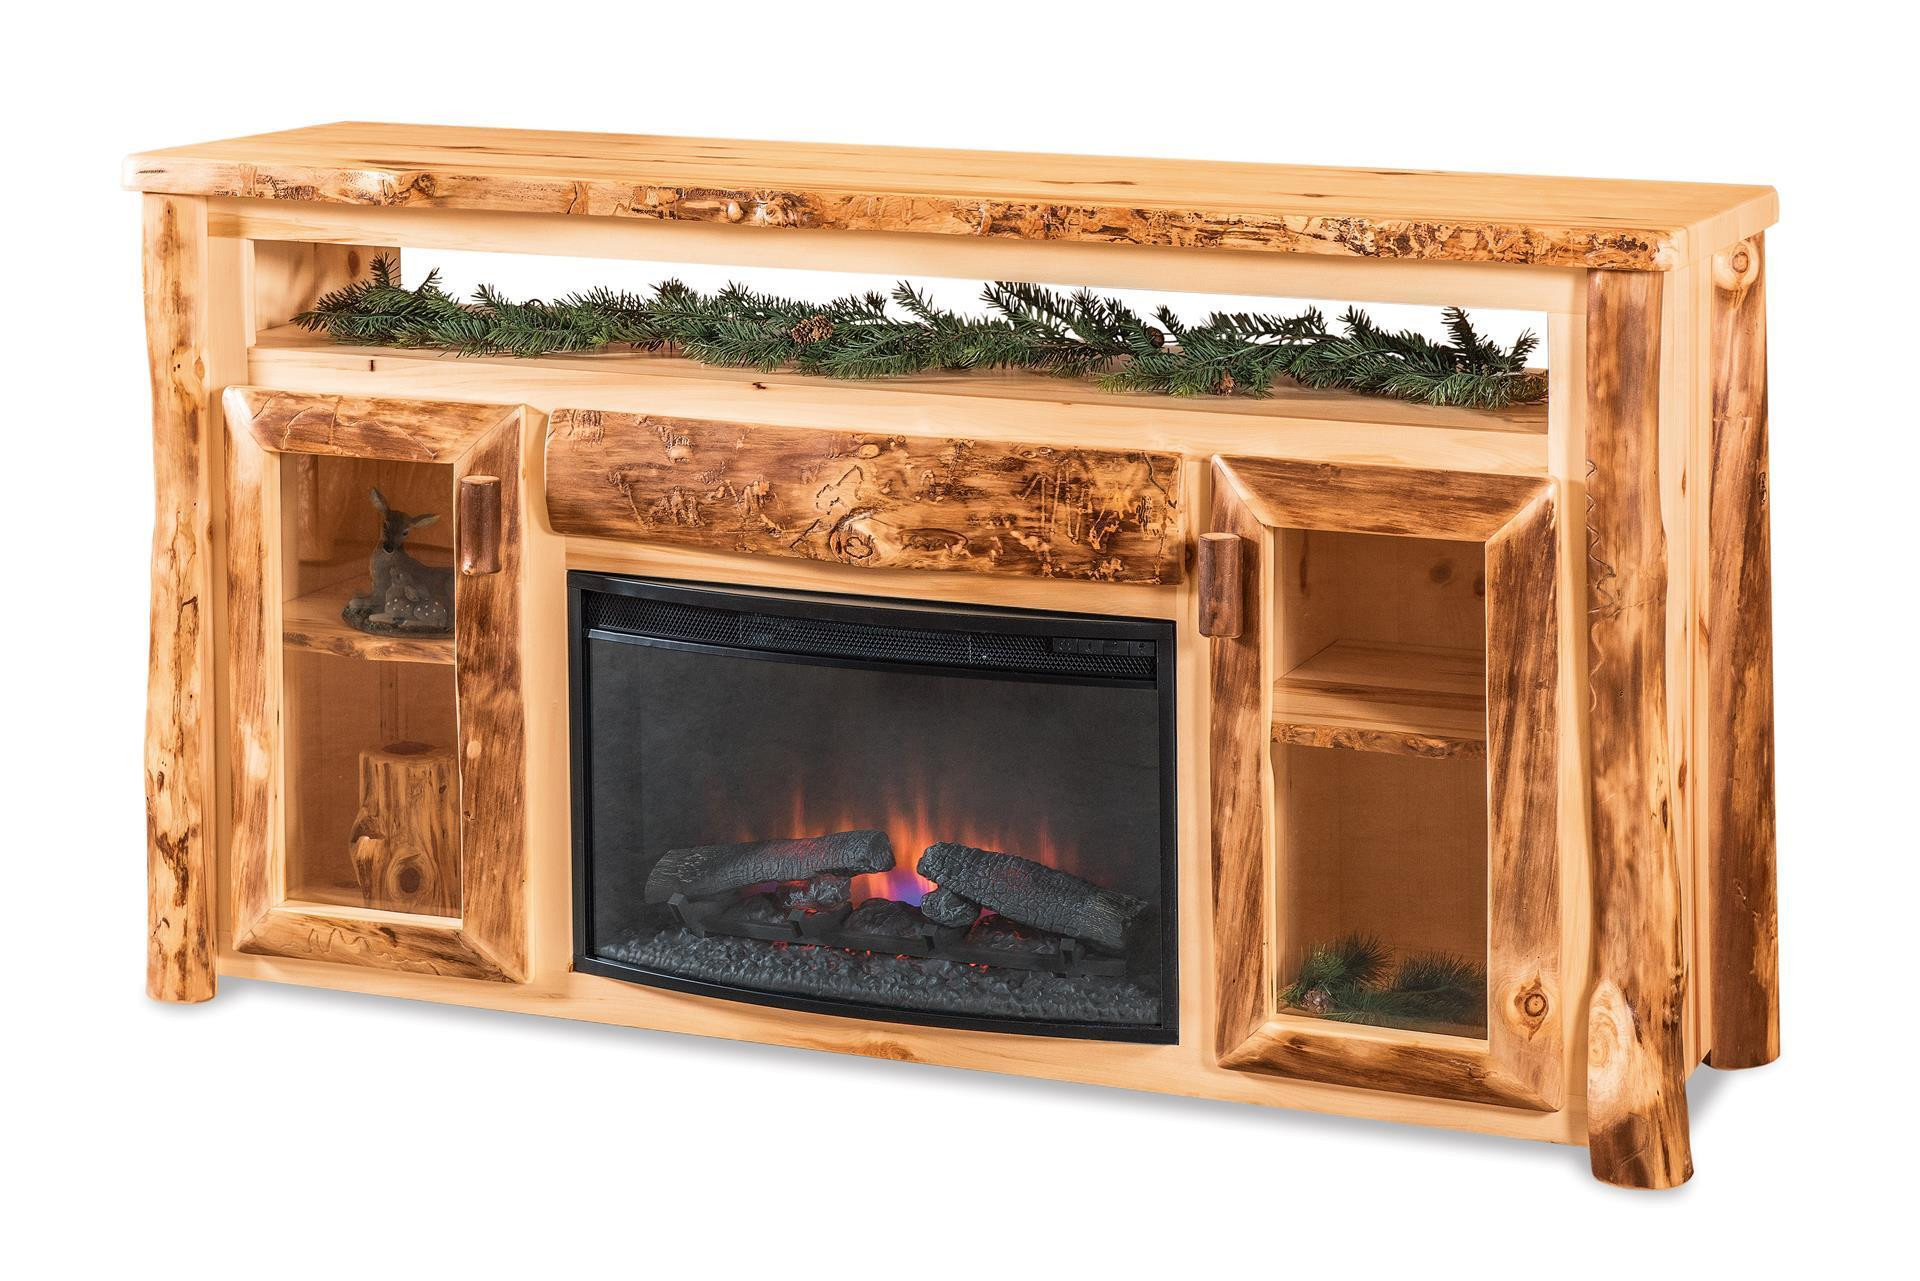 Rustic Electric Fireplace
 Rustic Log TV Cabinet with Electric Fireplace from